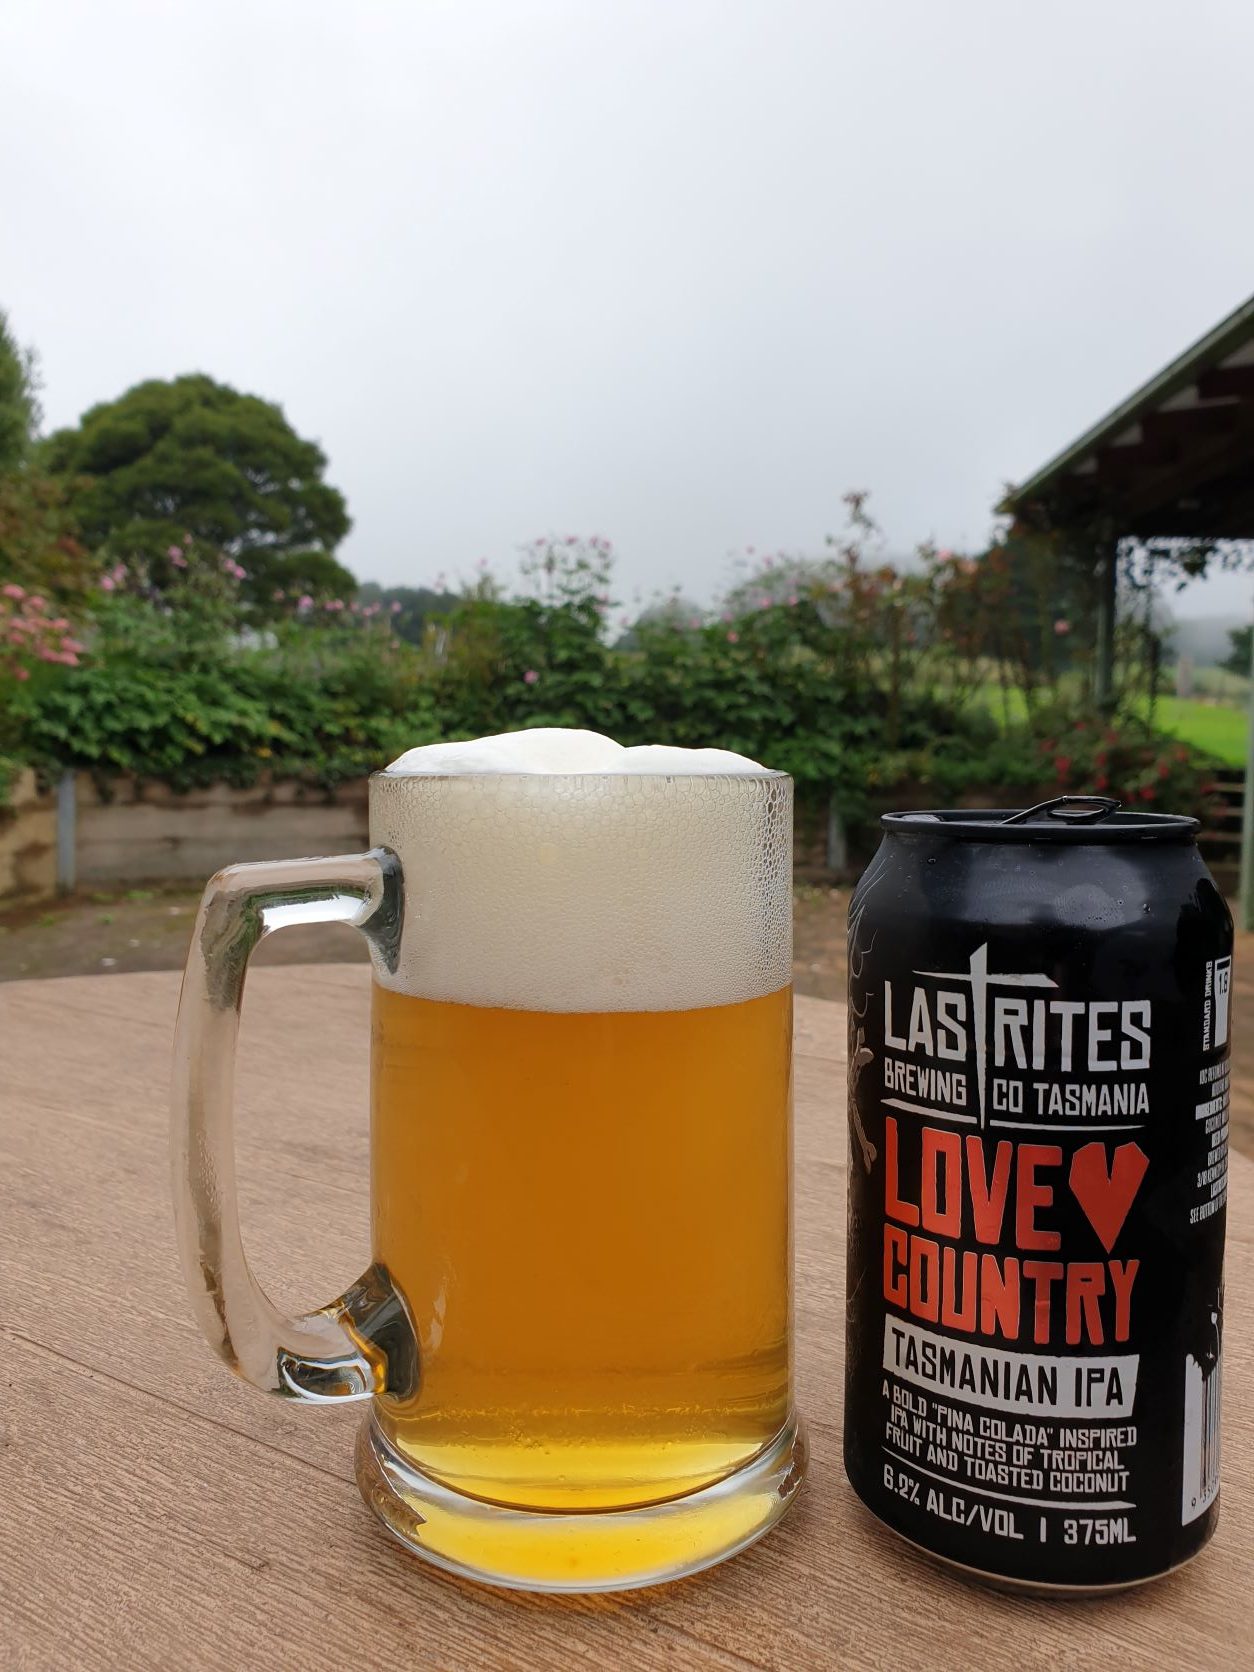 Love Country & She’s No Bette Midler by Last Rites Brewing